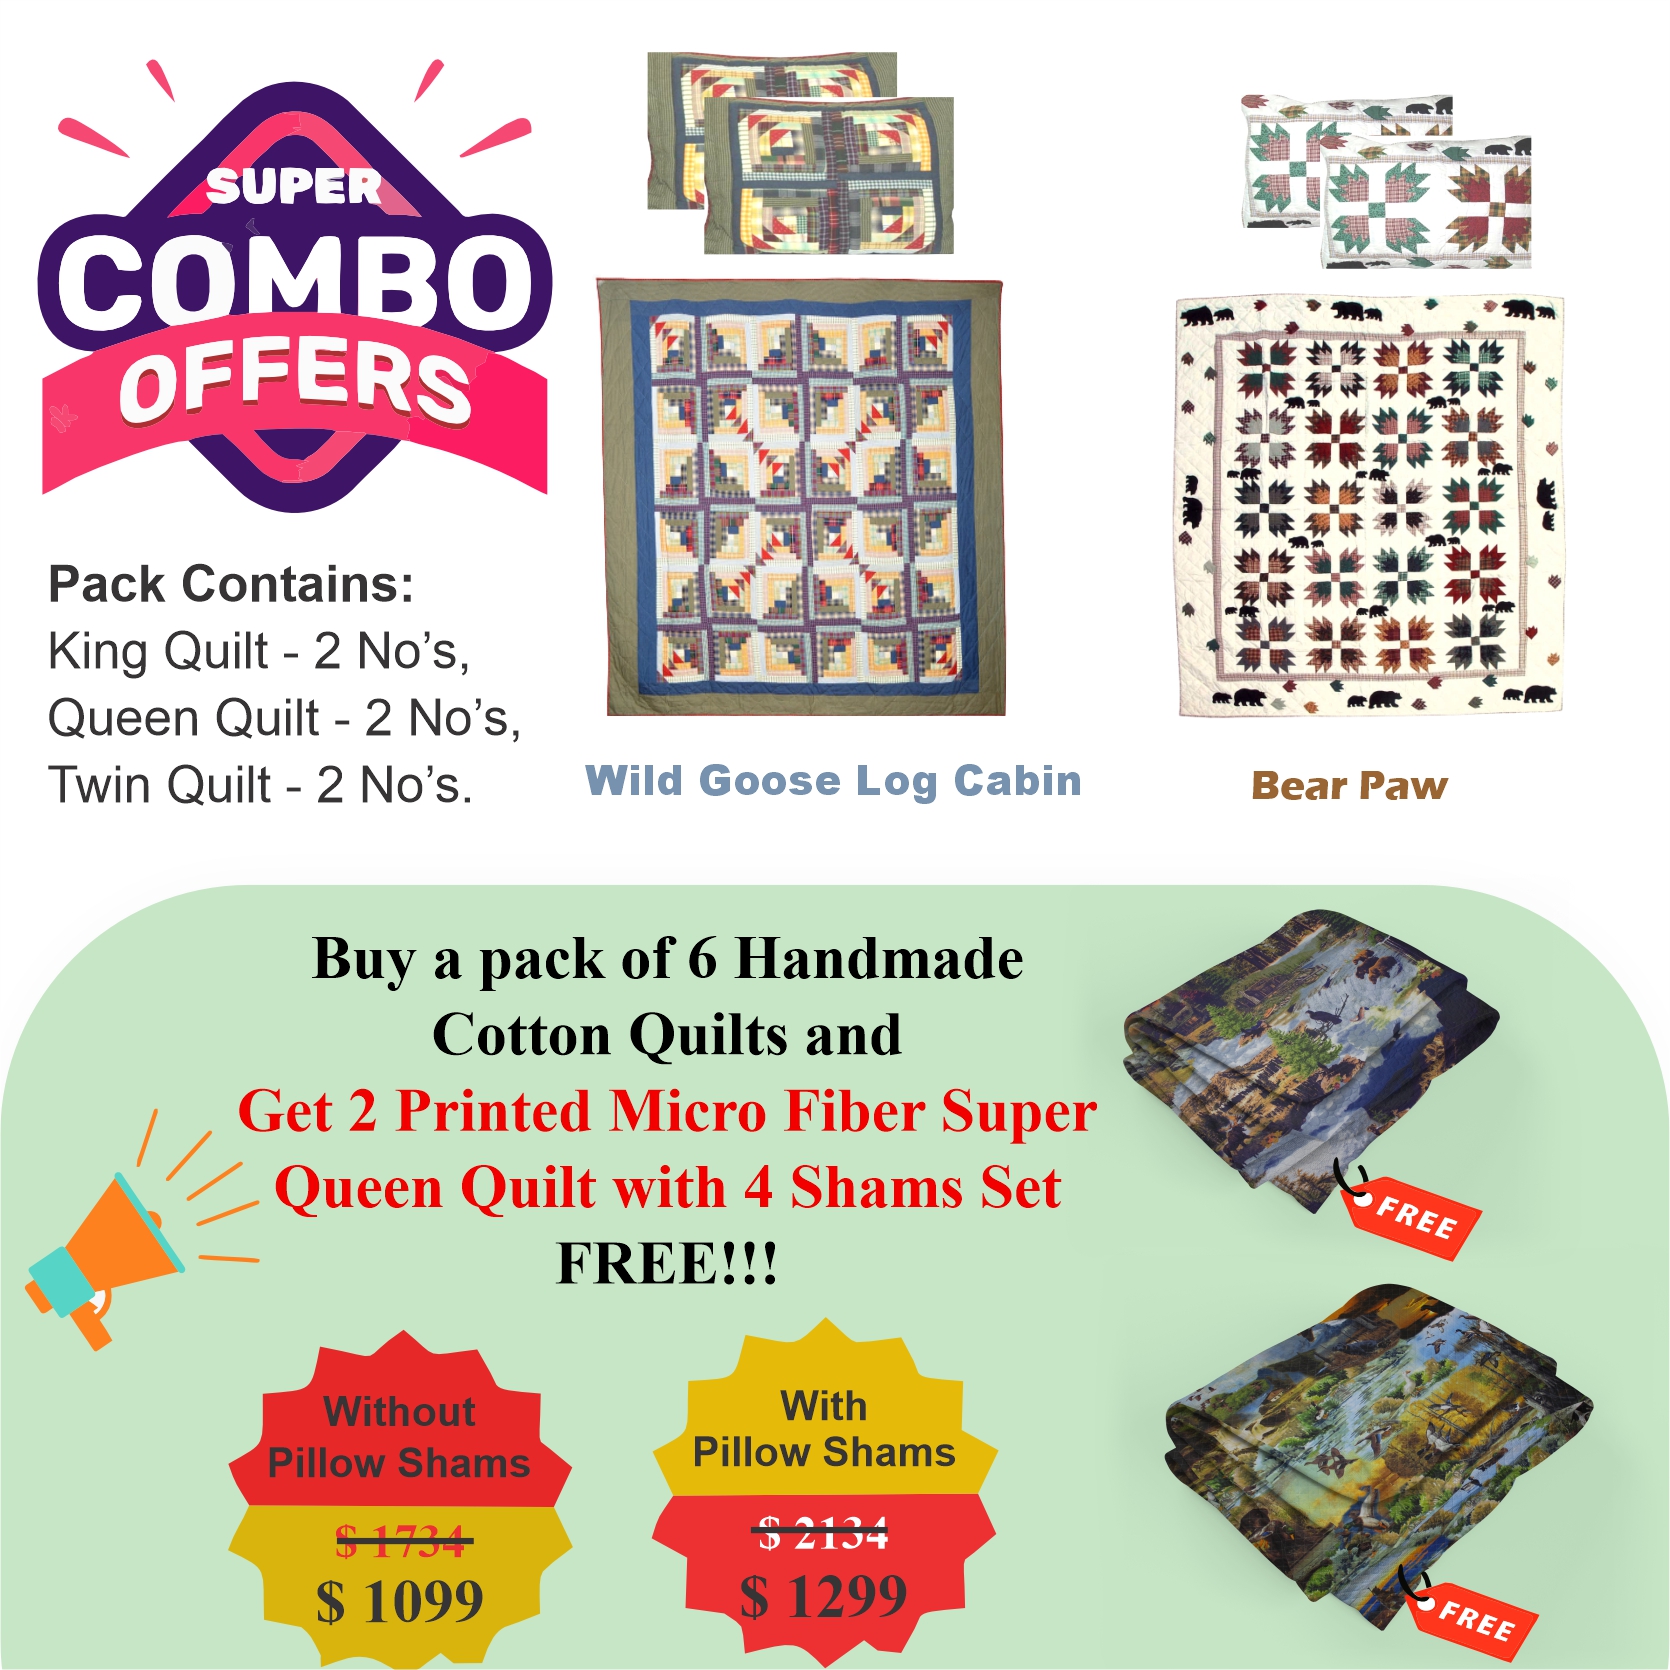 Geese in heaven /Bears Paw  - Pack of 6 handmade cotton quilts | Buy 6 cotton quilts and get 2 Printed Microfiber Super Queen Quilt with 2 Shams